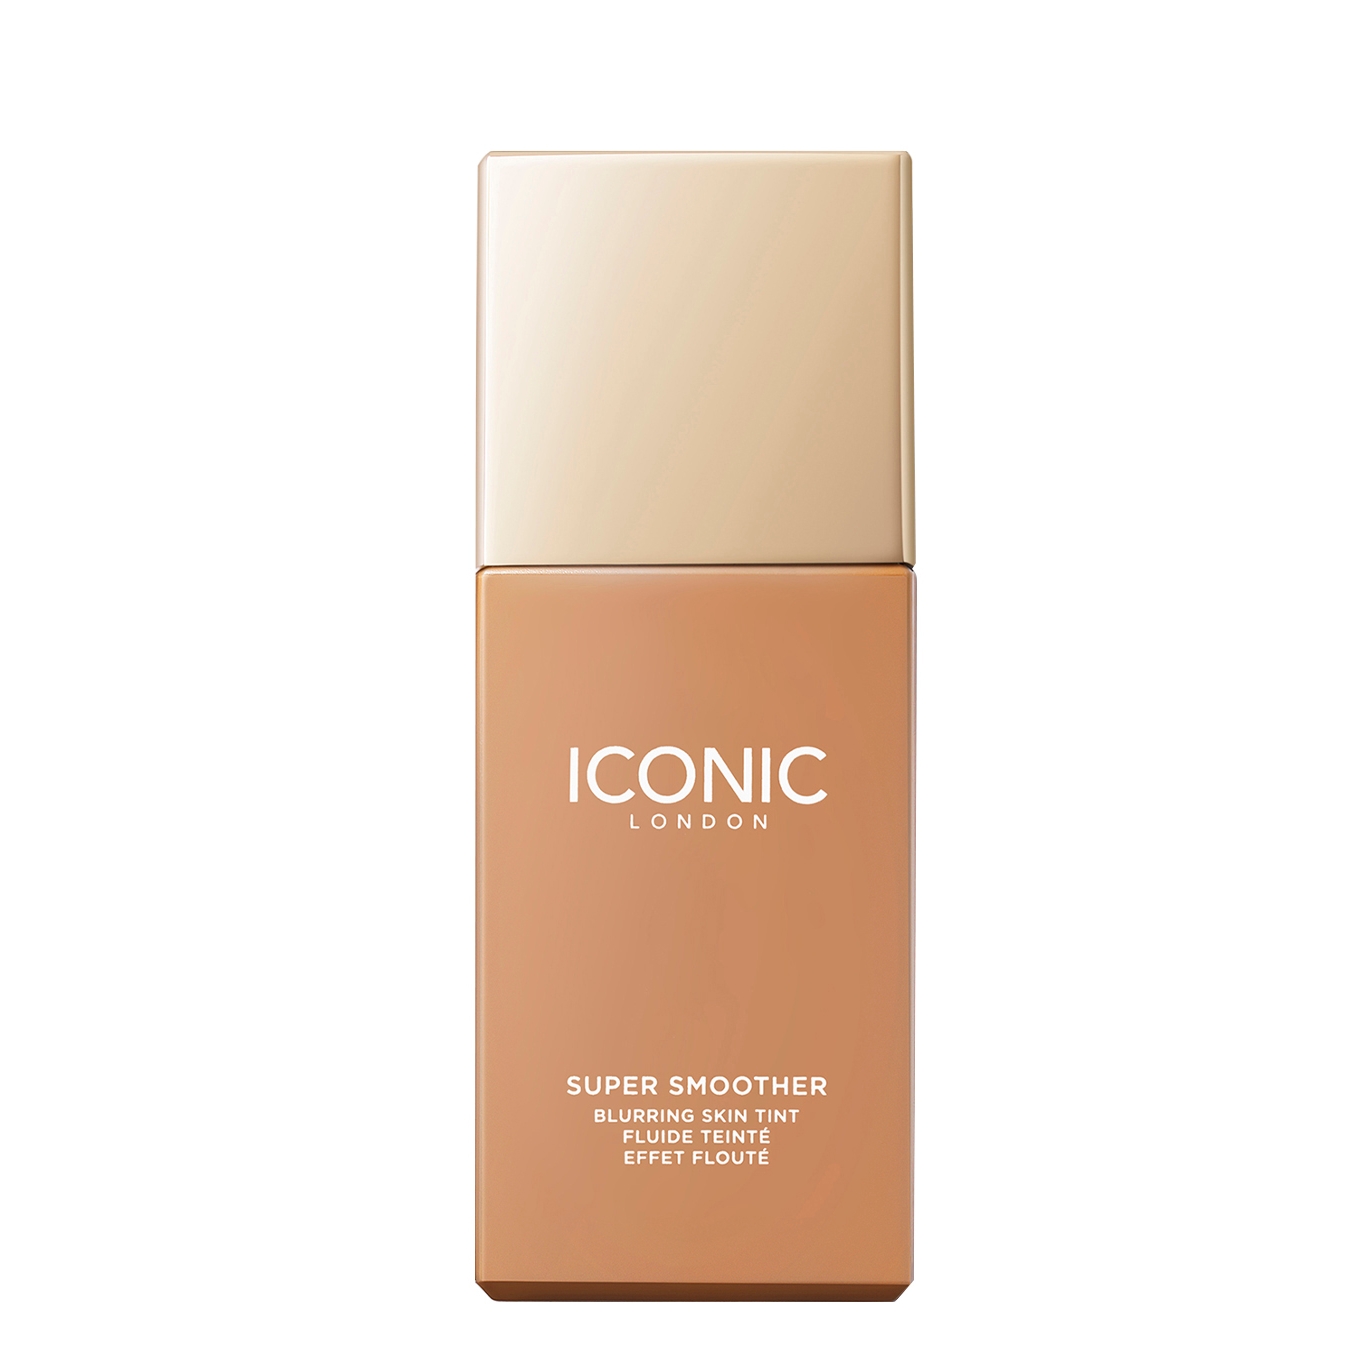 Iconic London Super Smoother Blurring Skin Tint - Colour Neutral Medium